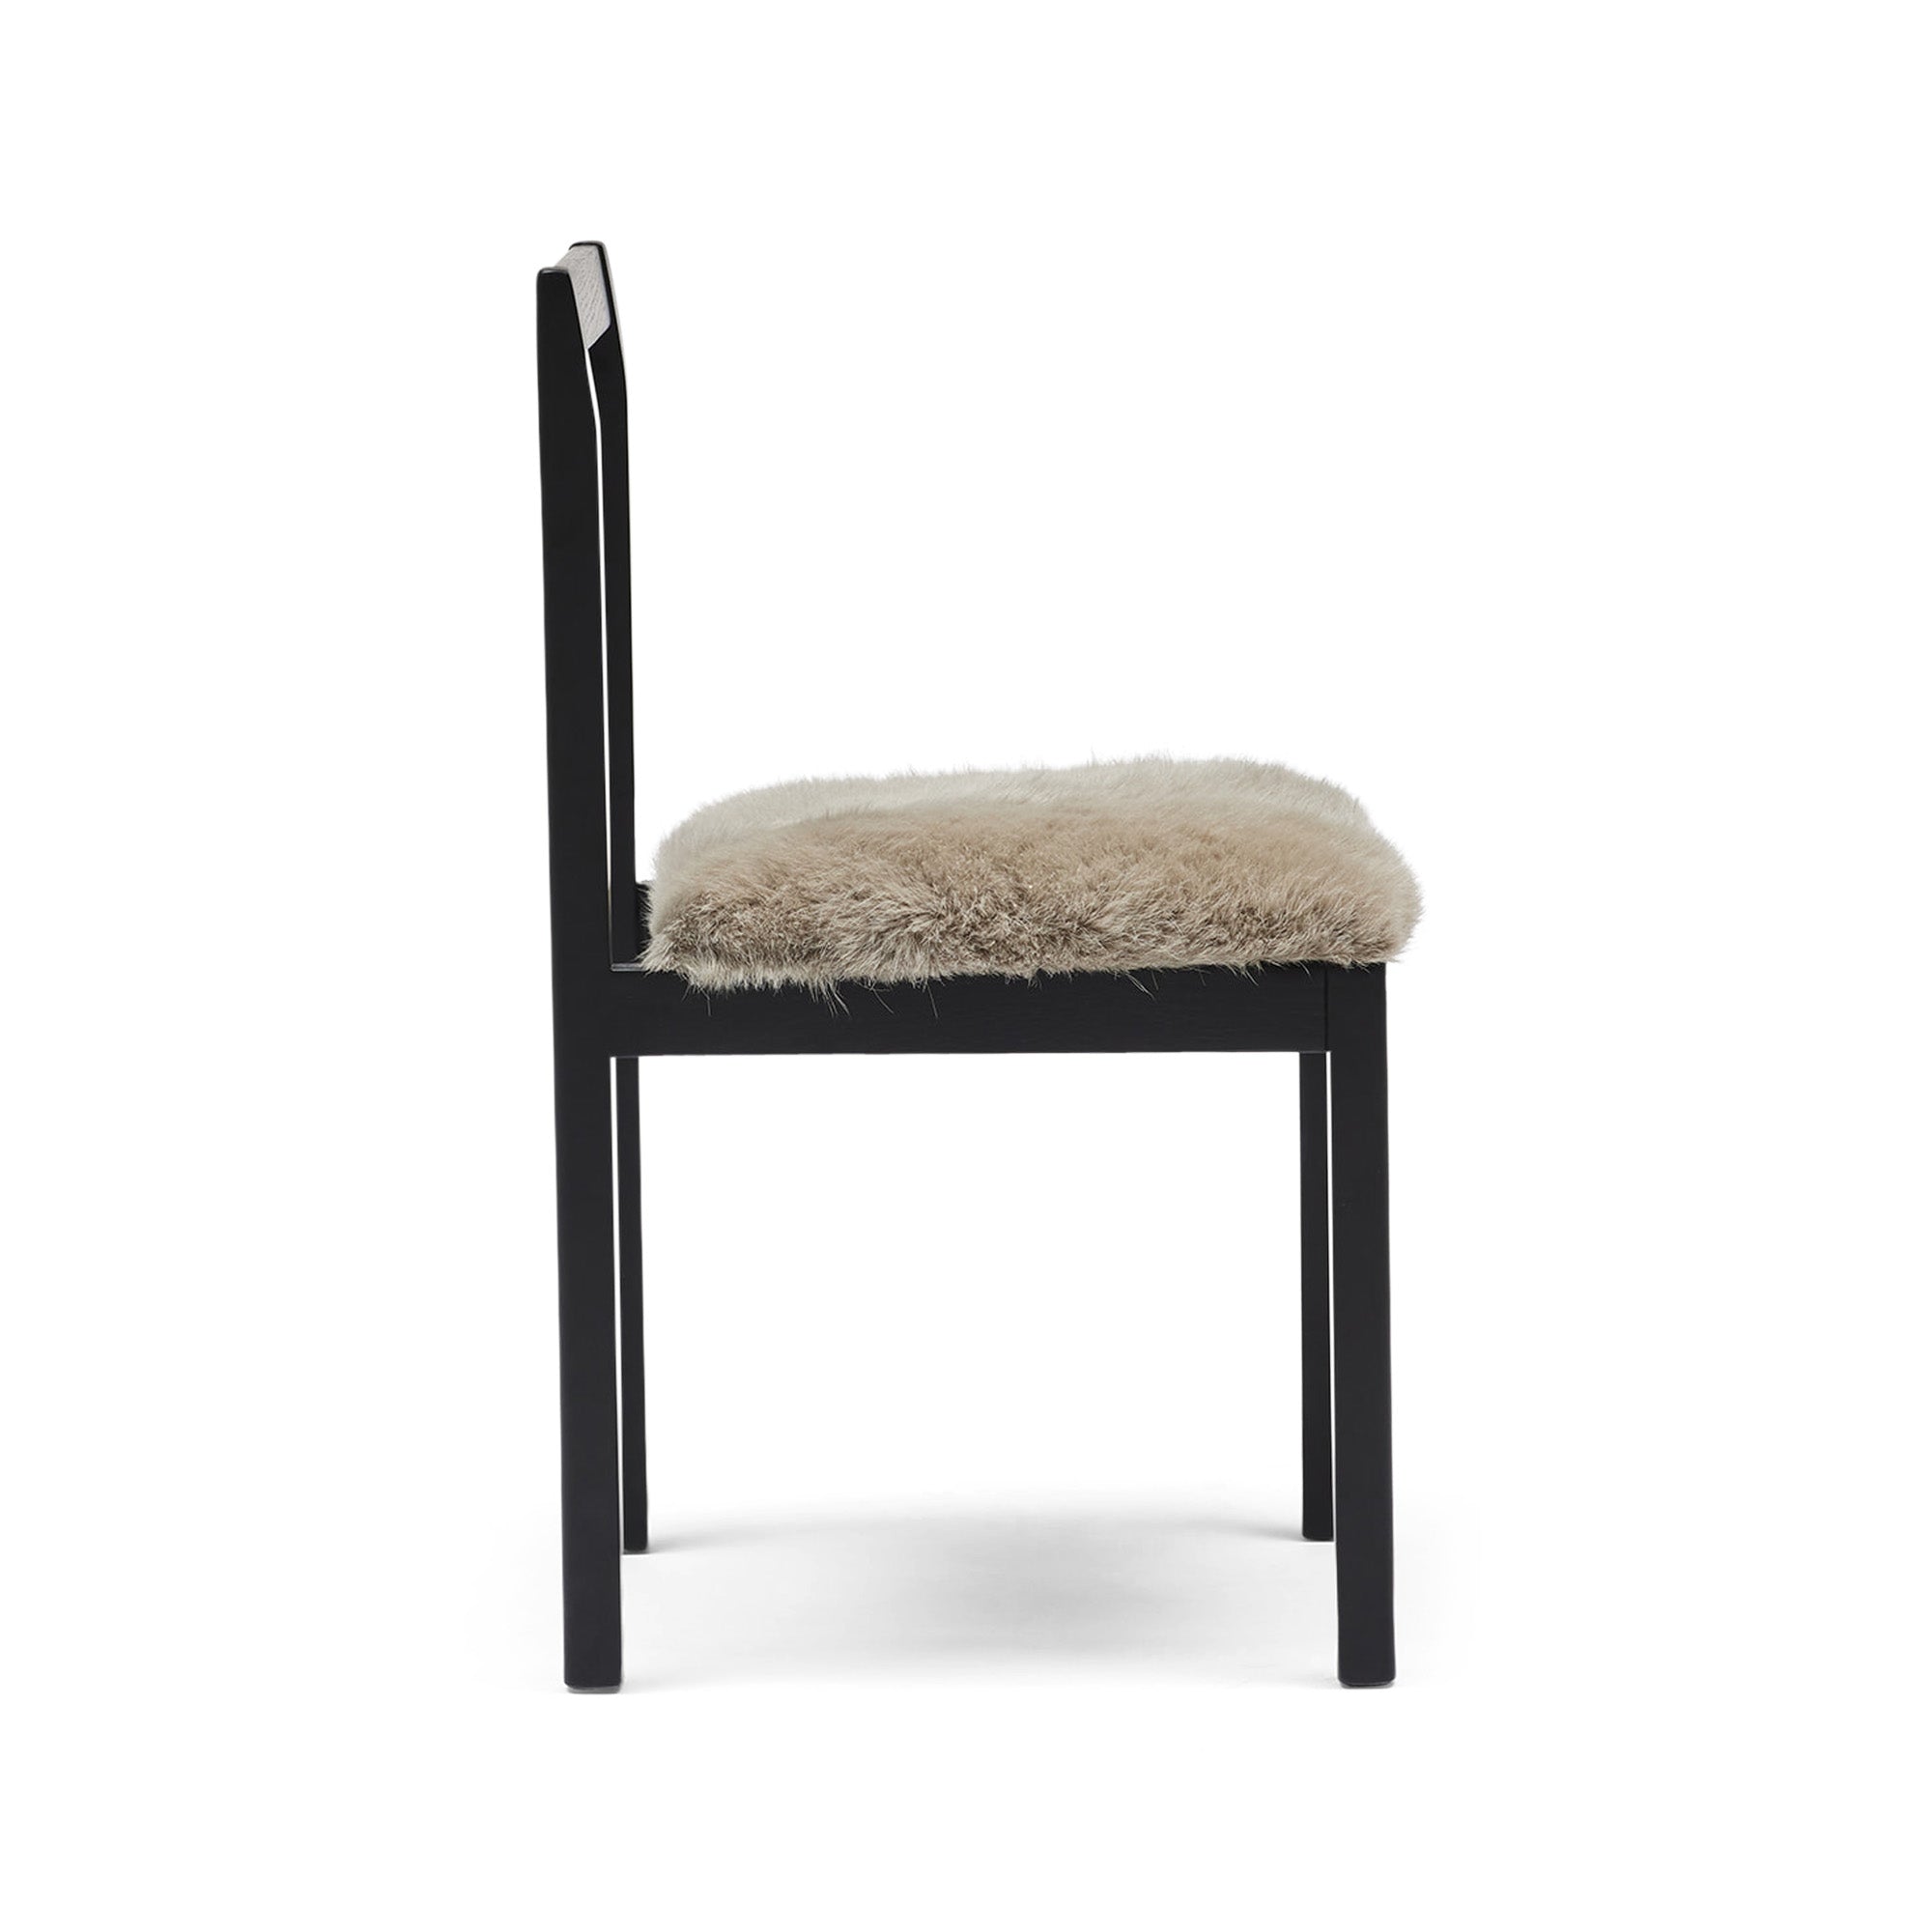 Subo Dining Chair Grey Goat Skin